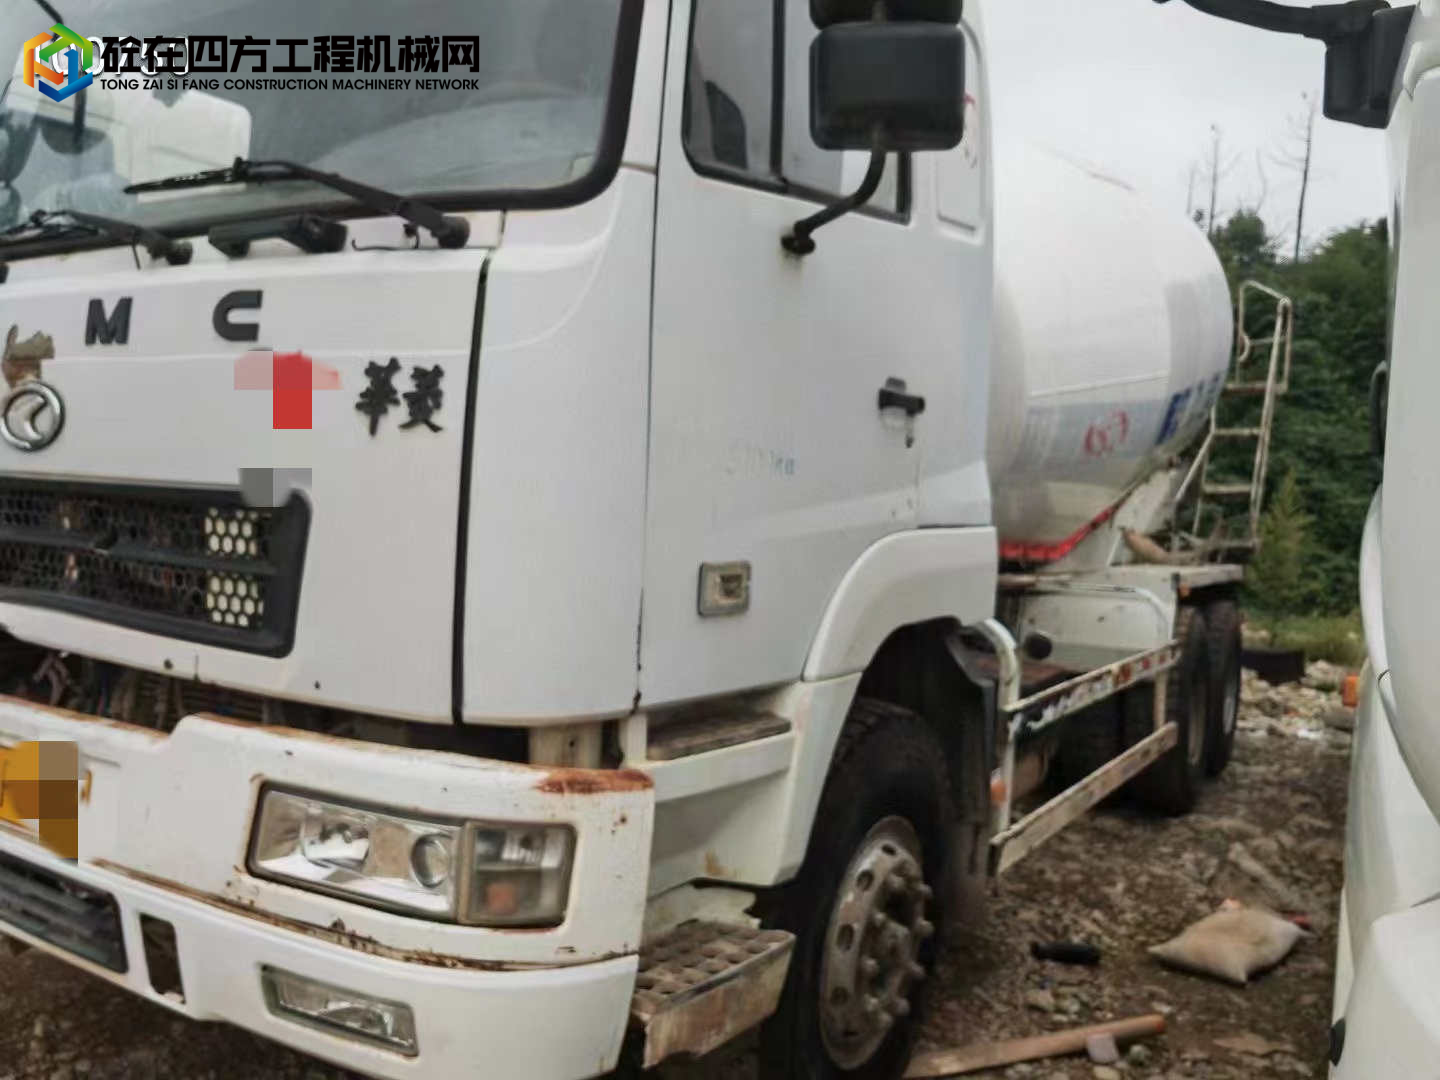 https://images.tongzsf.com/tong/truck_machine/20231107/16549cef06f83a.jpg